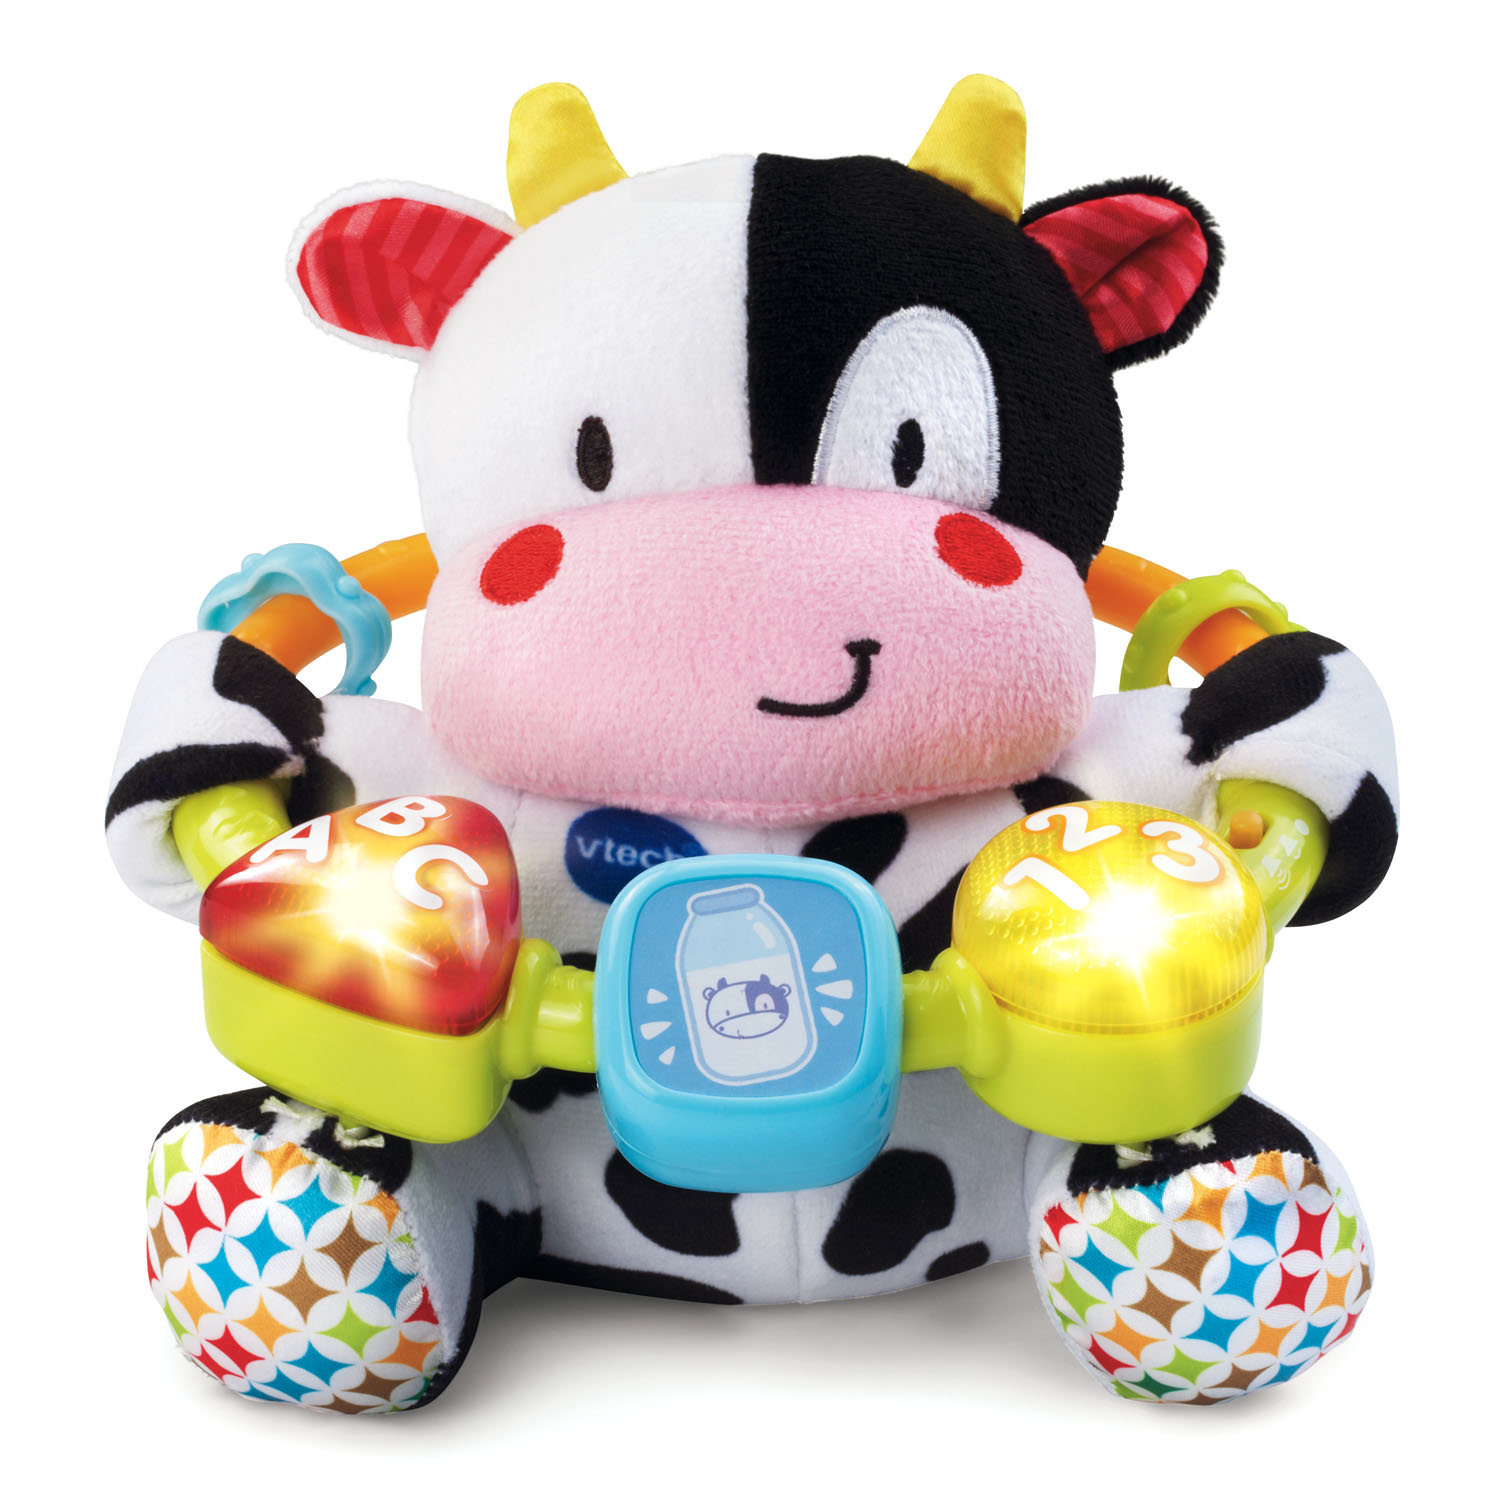 VTech Lil' Critters Moosical Beads, Plush Cow, Musical Baby Toy - image 1 of 7